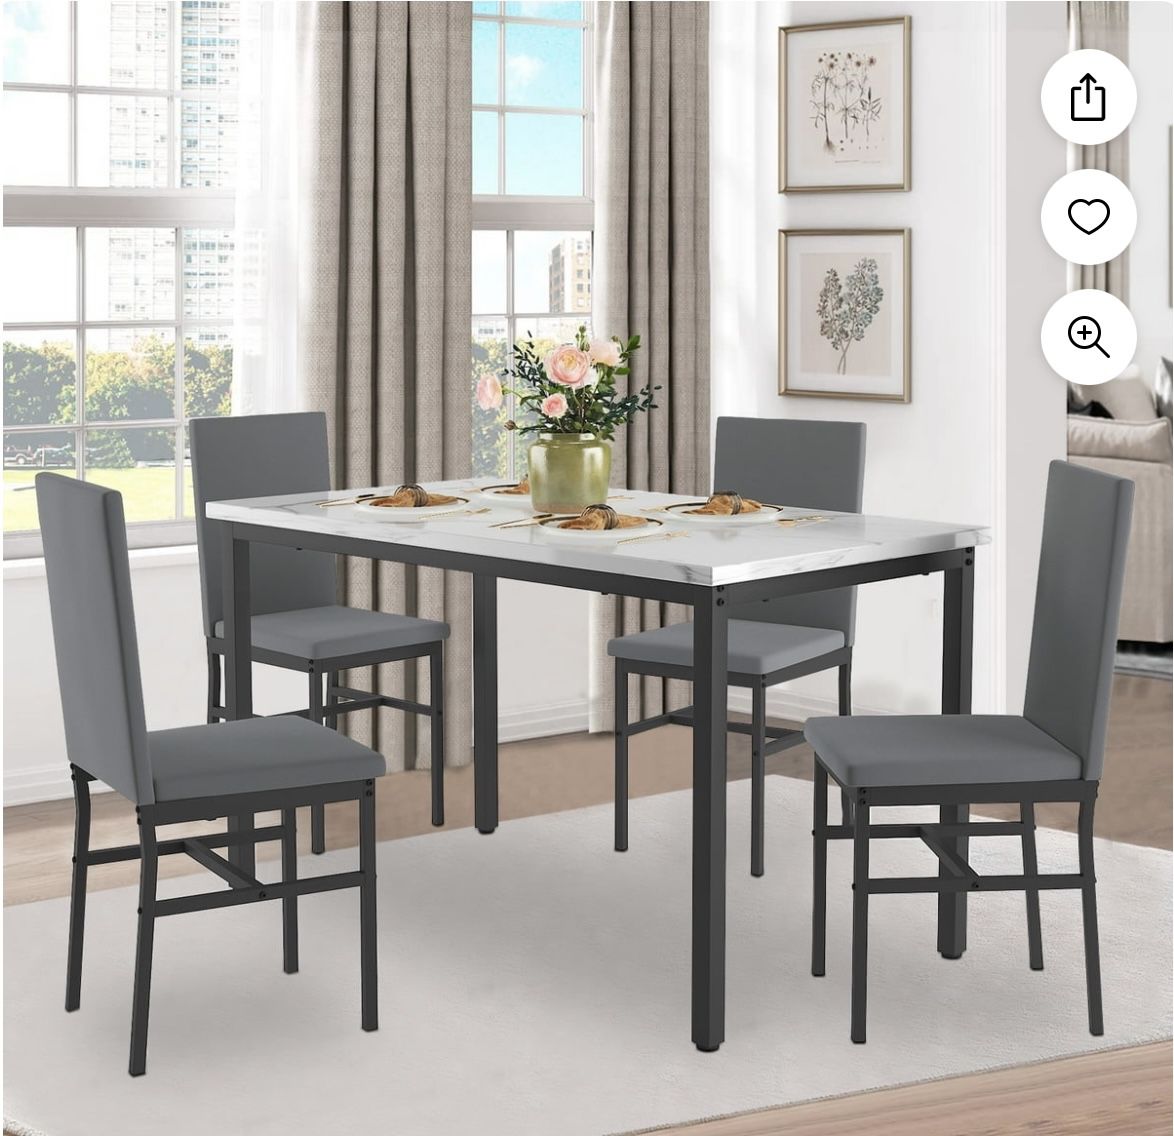 Brand New In Box 4 Chairs & Dining Room Table